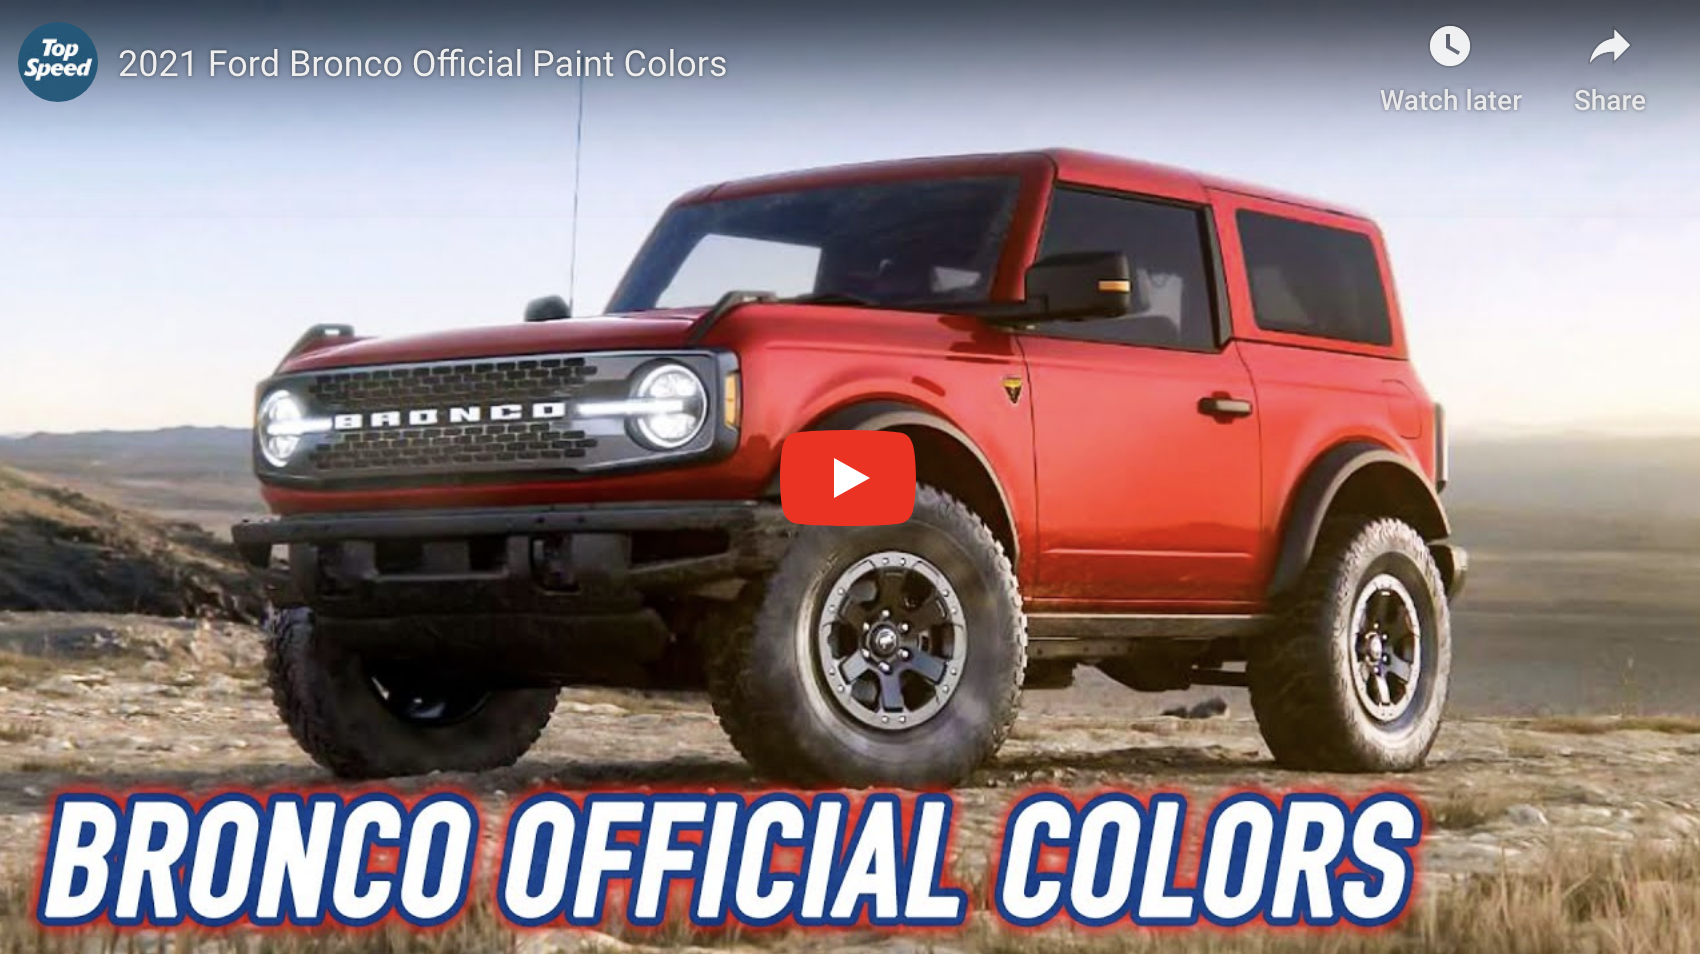 New Truck News | Which color 2021 Ford Bronco would you want? | Street